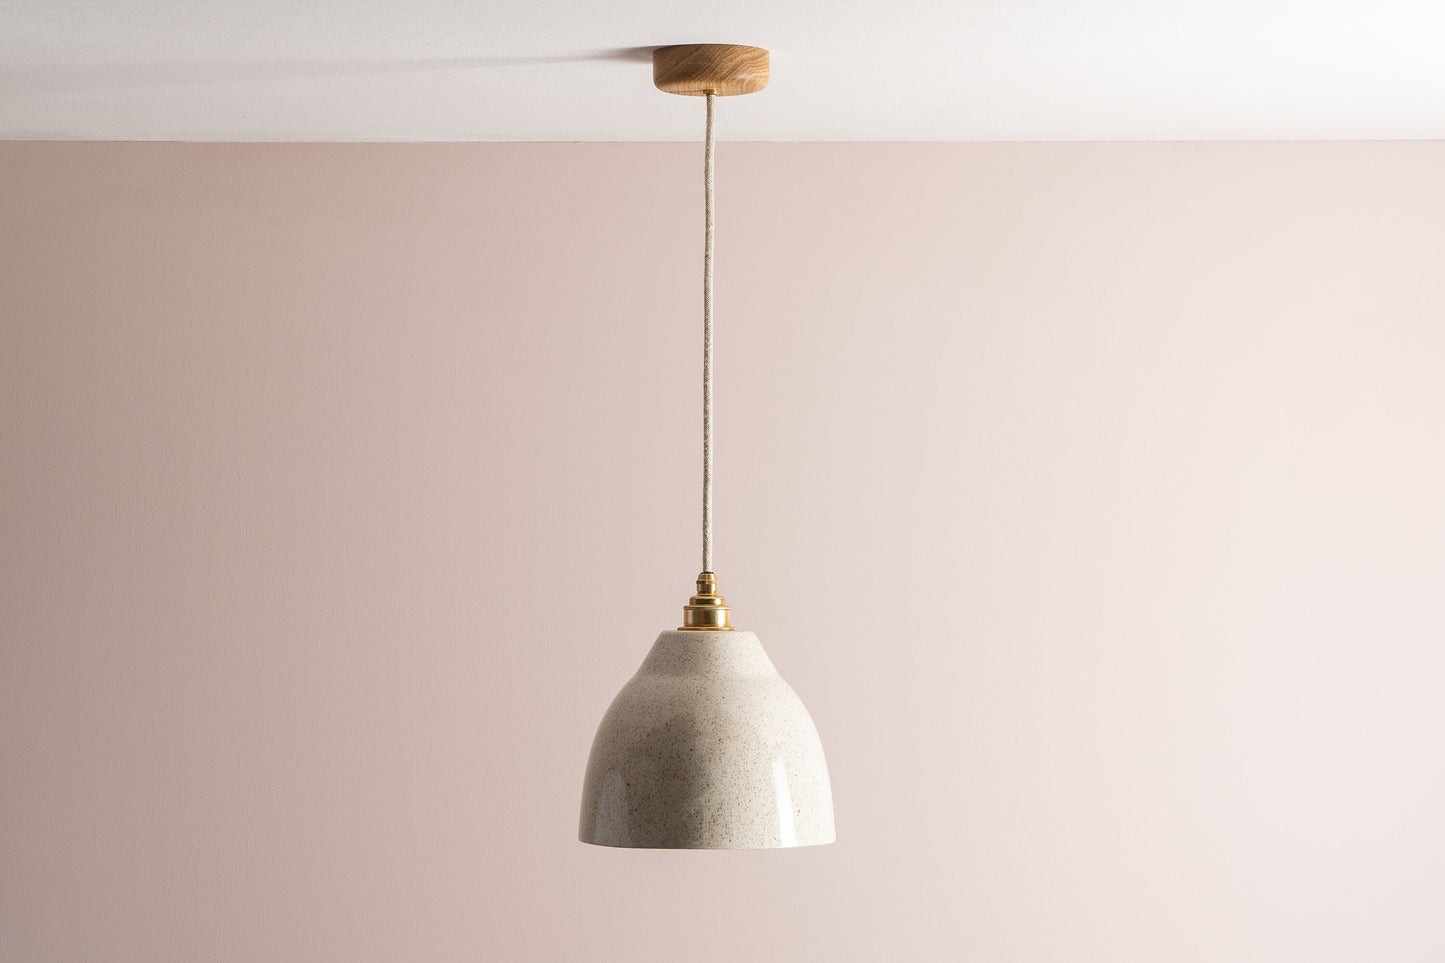 Speckled Cream Gloss Element Pendant Light in Ceramic and Brass/Nickel by StudioHaran